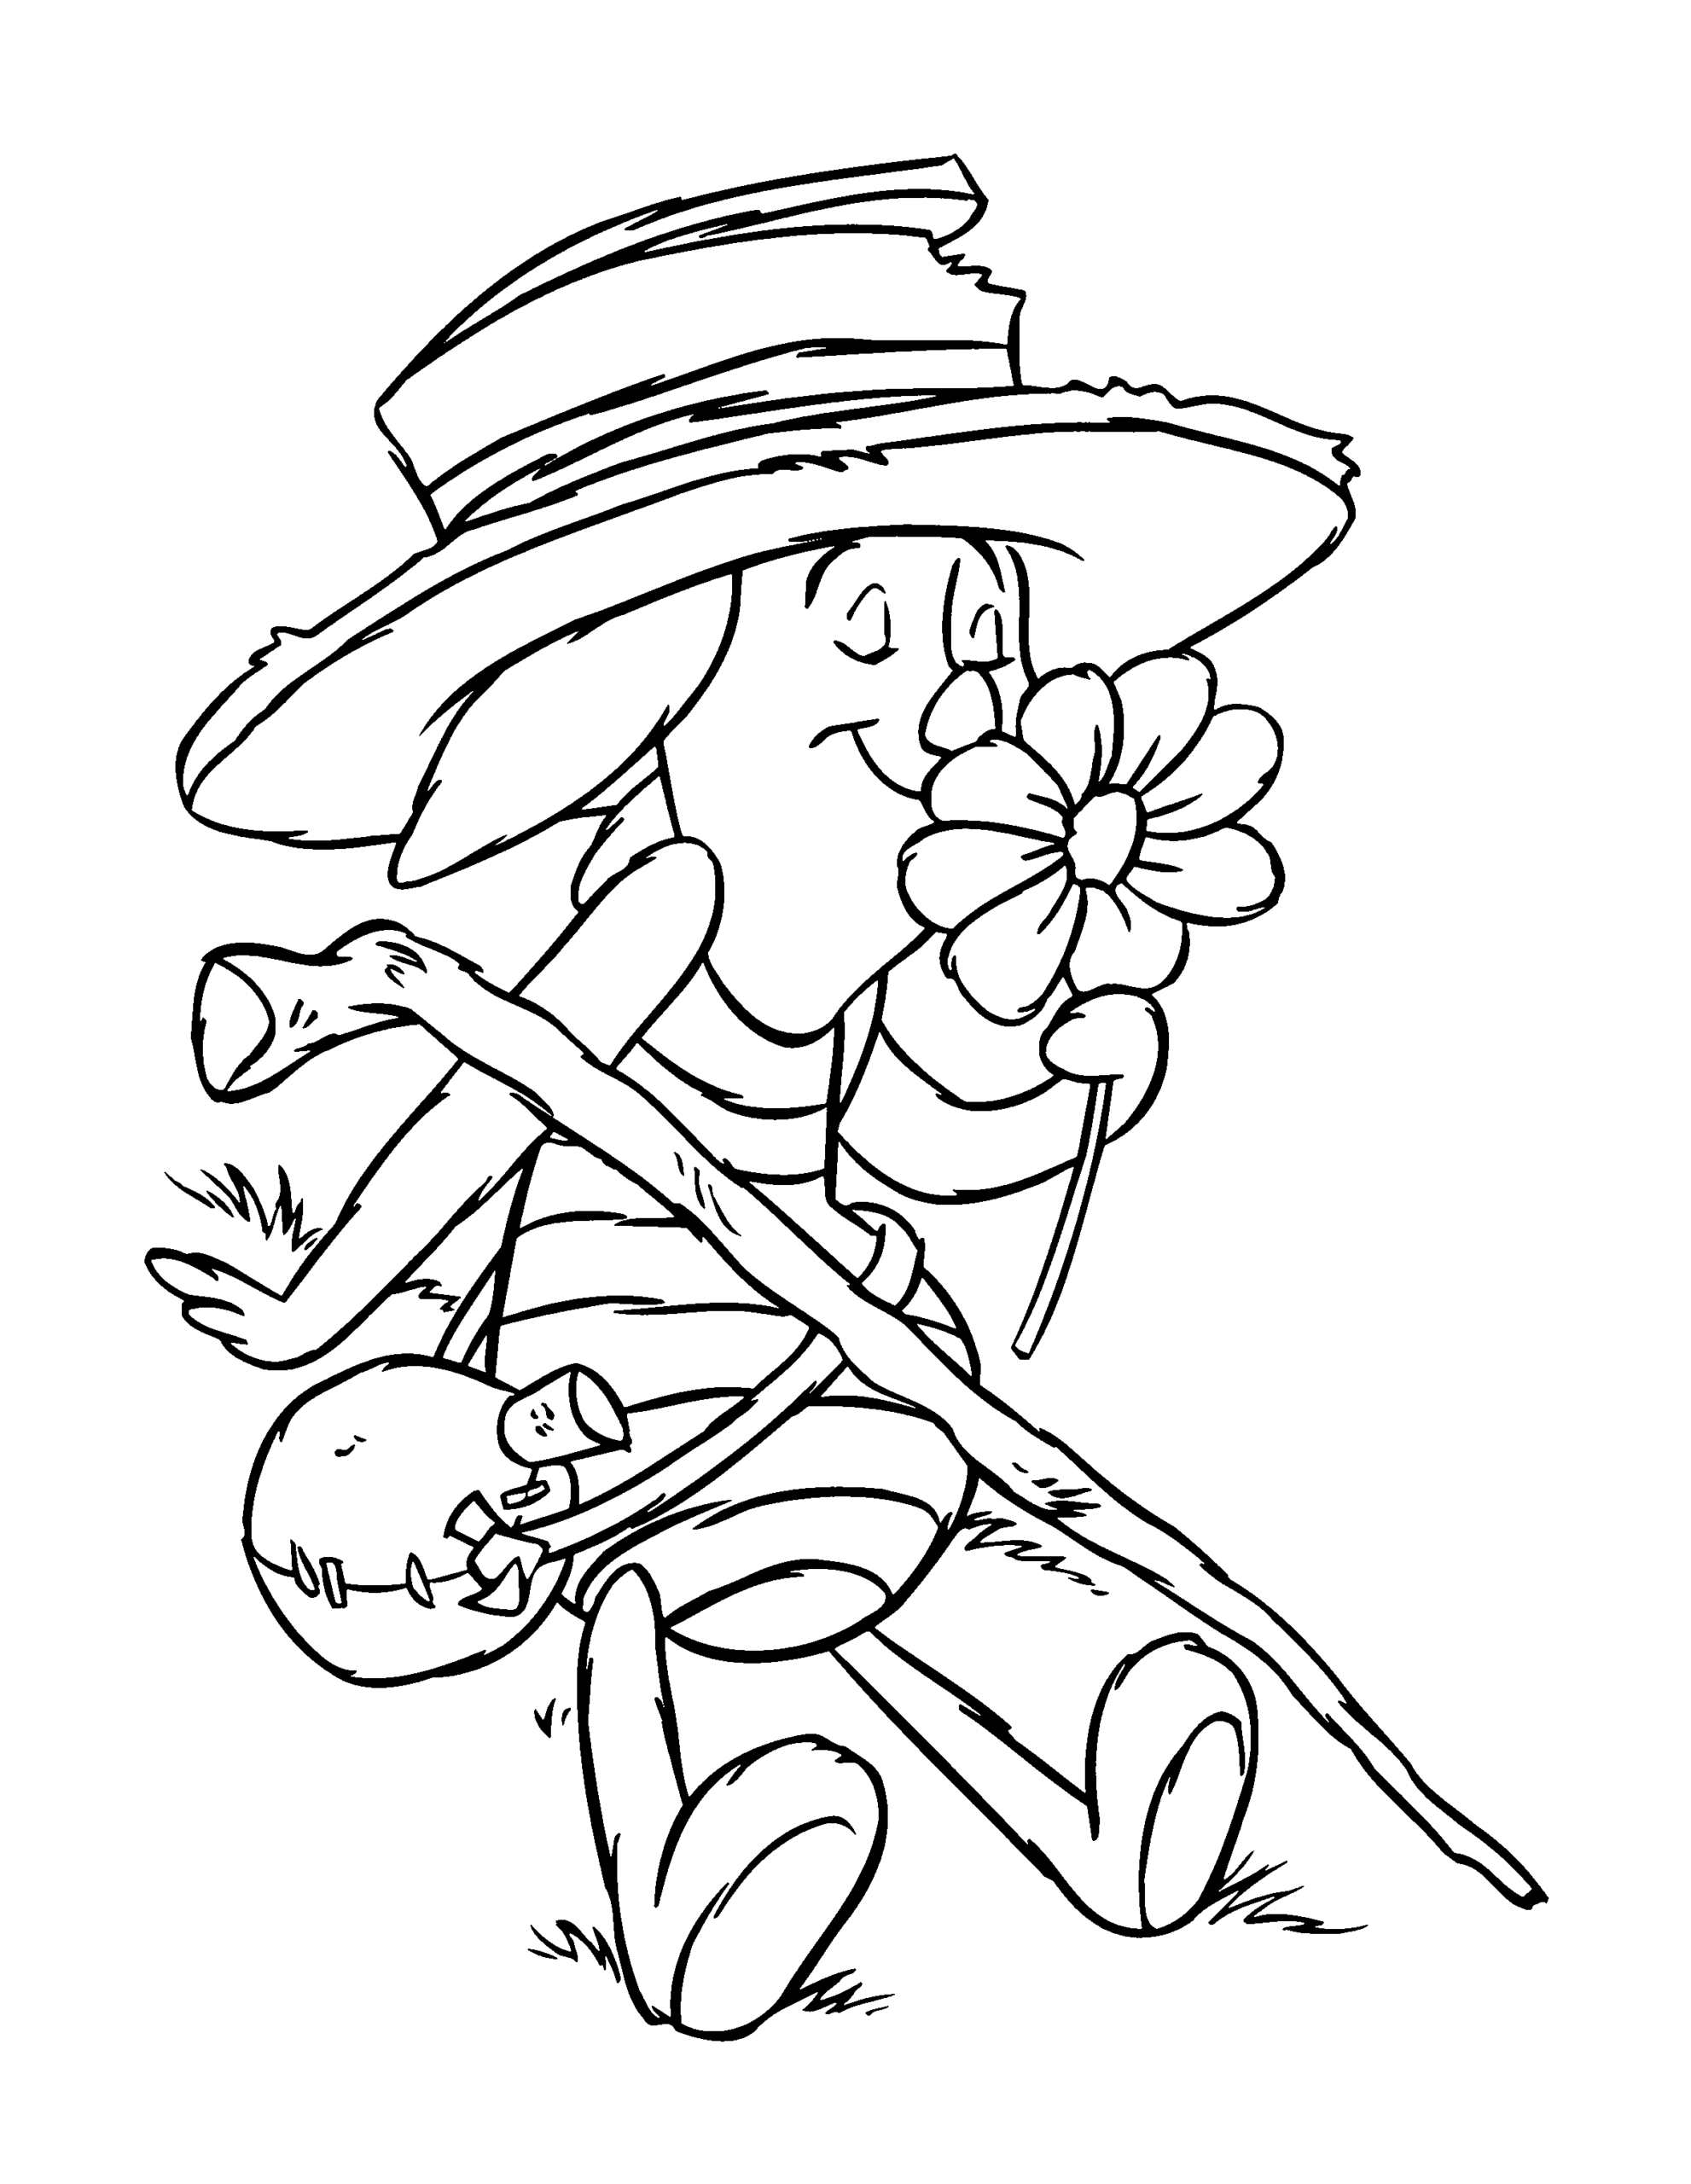 Winnie the Pooh Coloring Pages Cartoons winnie the pooh 39 Printable 2020 7145 Coloring4free